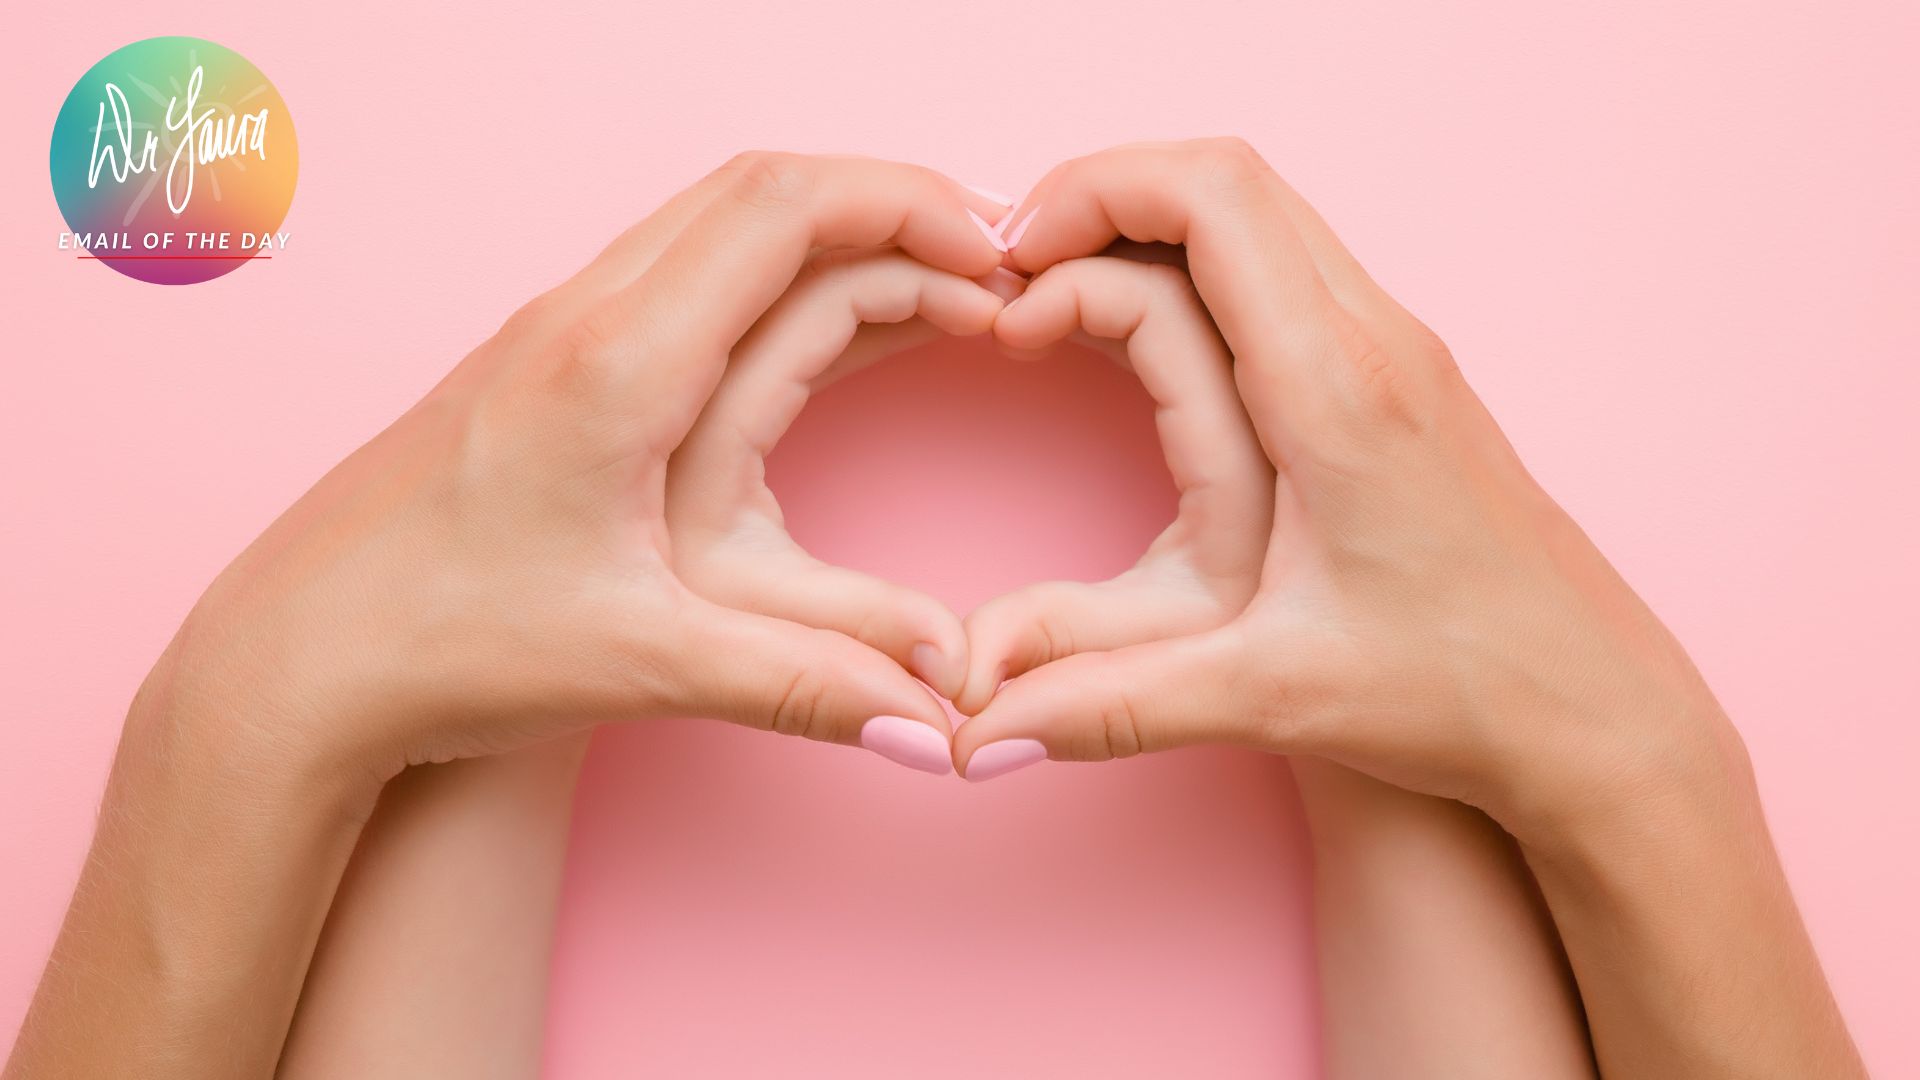 Bigger pair of hands makes heart with smaller pair of hands within it